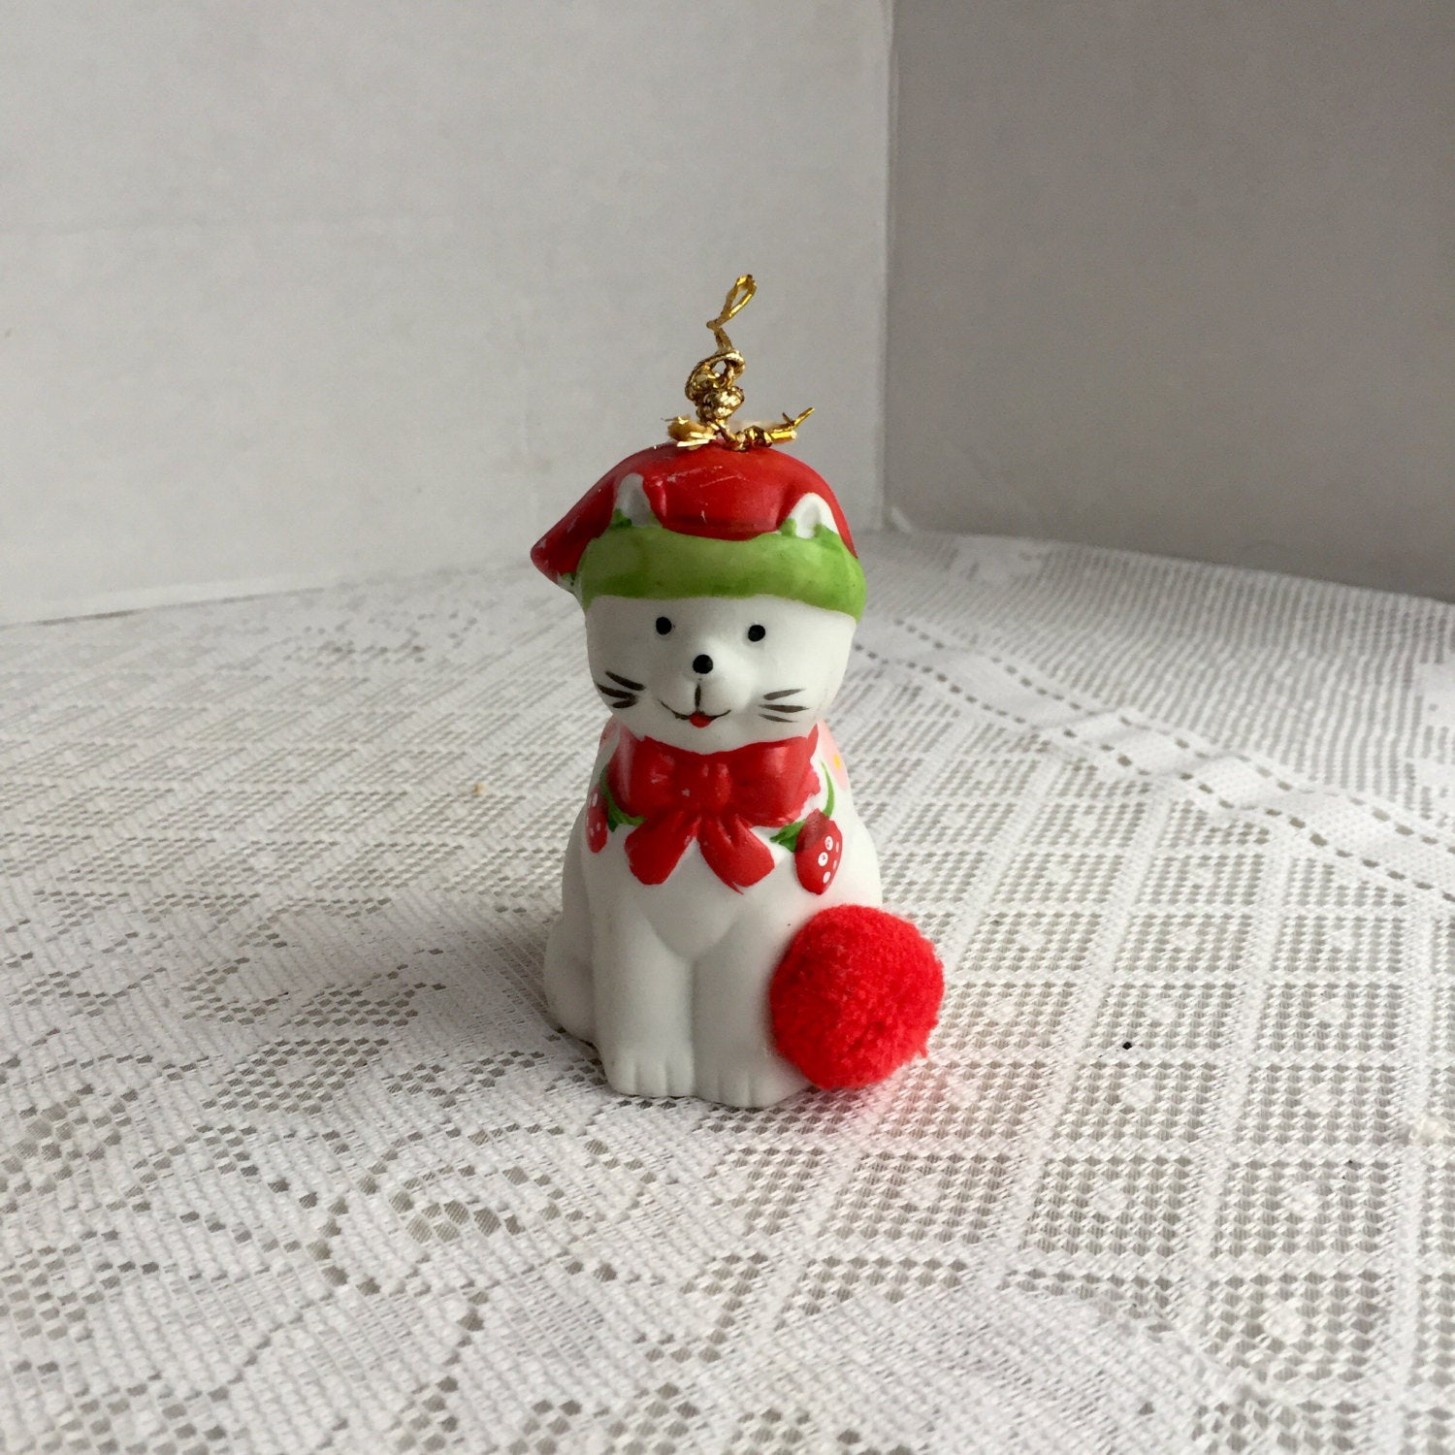 Vintage Ceramic Bell / Red And White Cat Figurine / Vintage Ceramic Christmas Tree Painting Cl Near Me